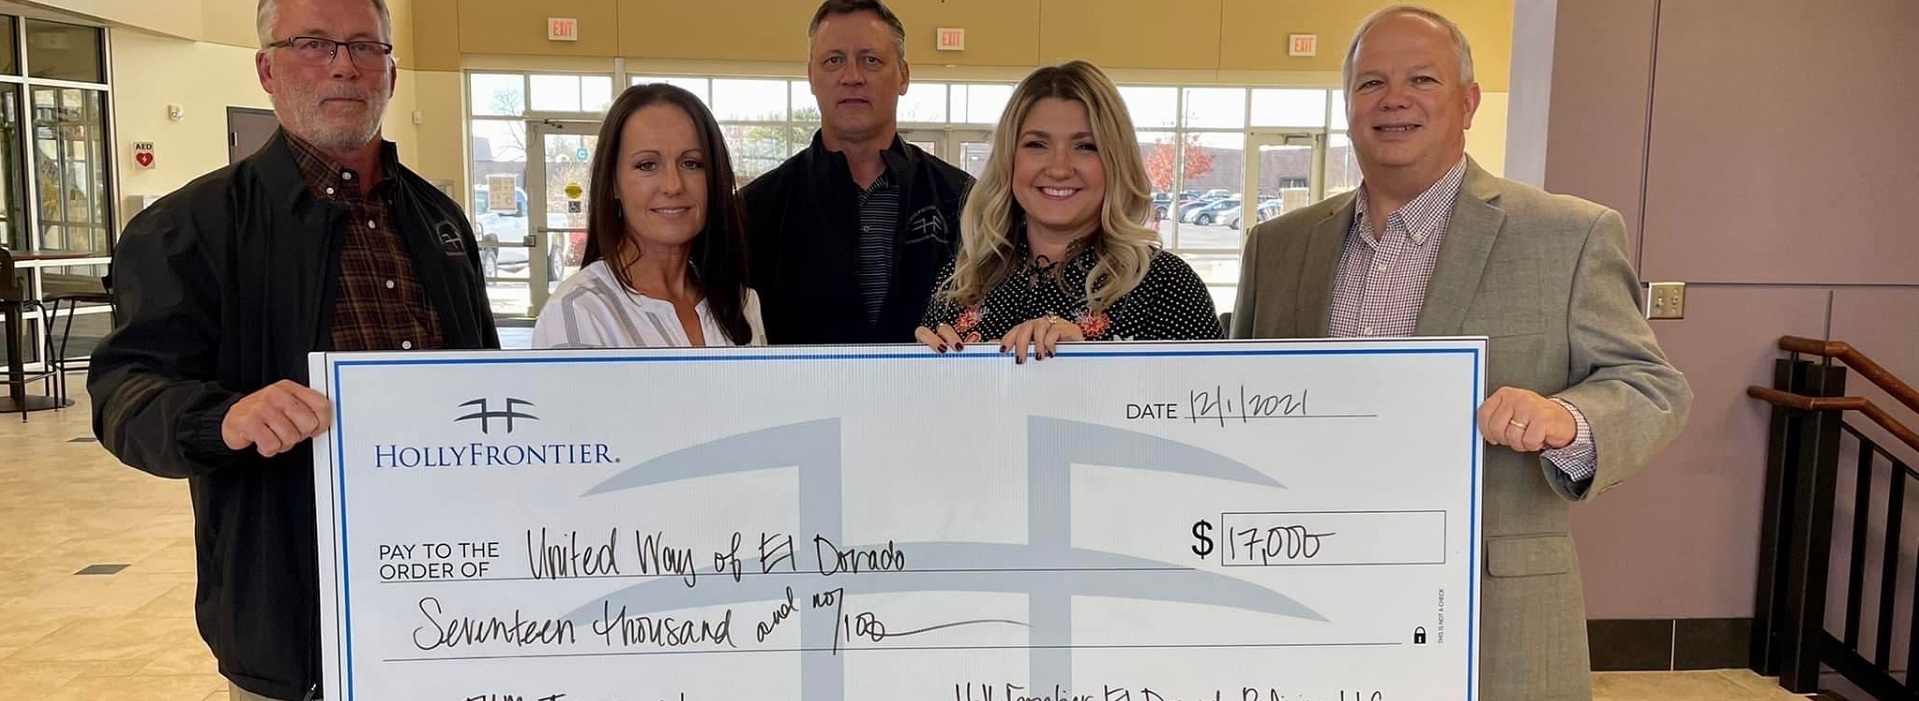 Holly Frontier giving check to united way